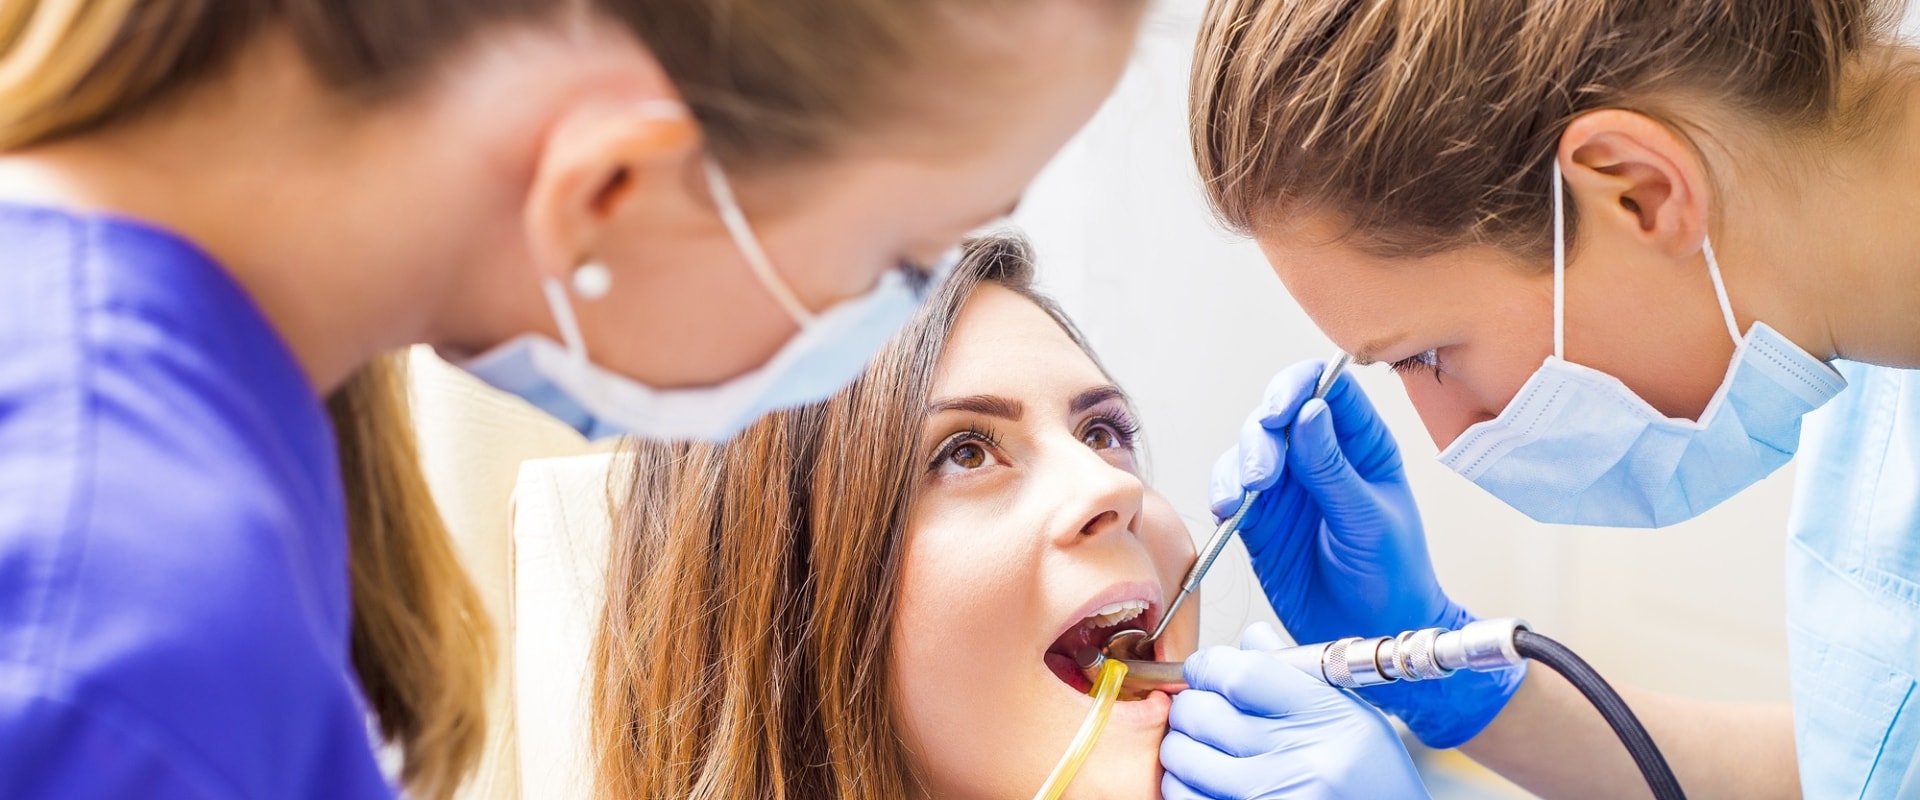 What are the benefits of dental care?